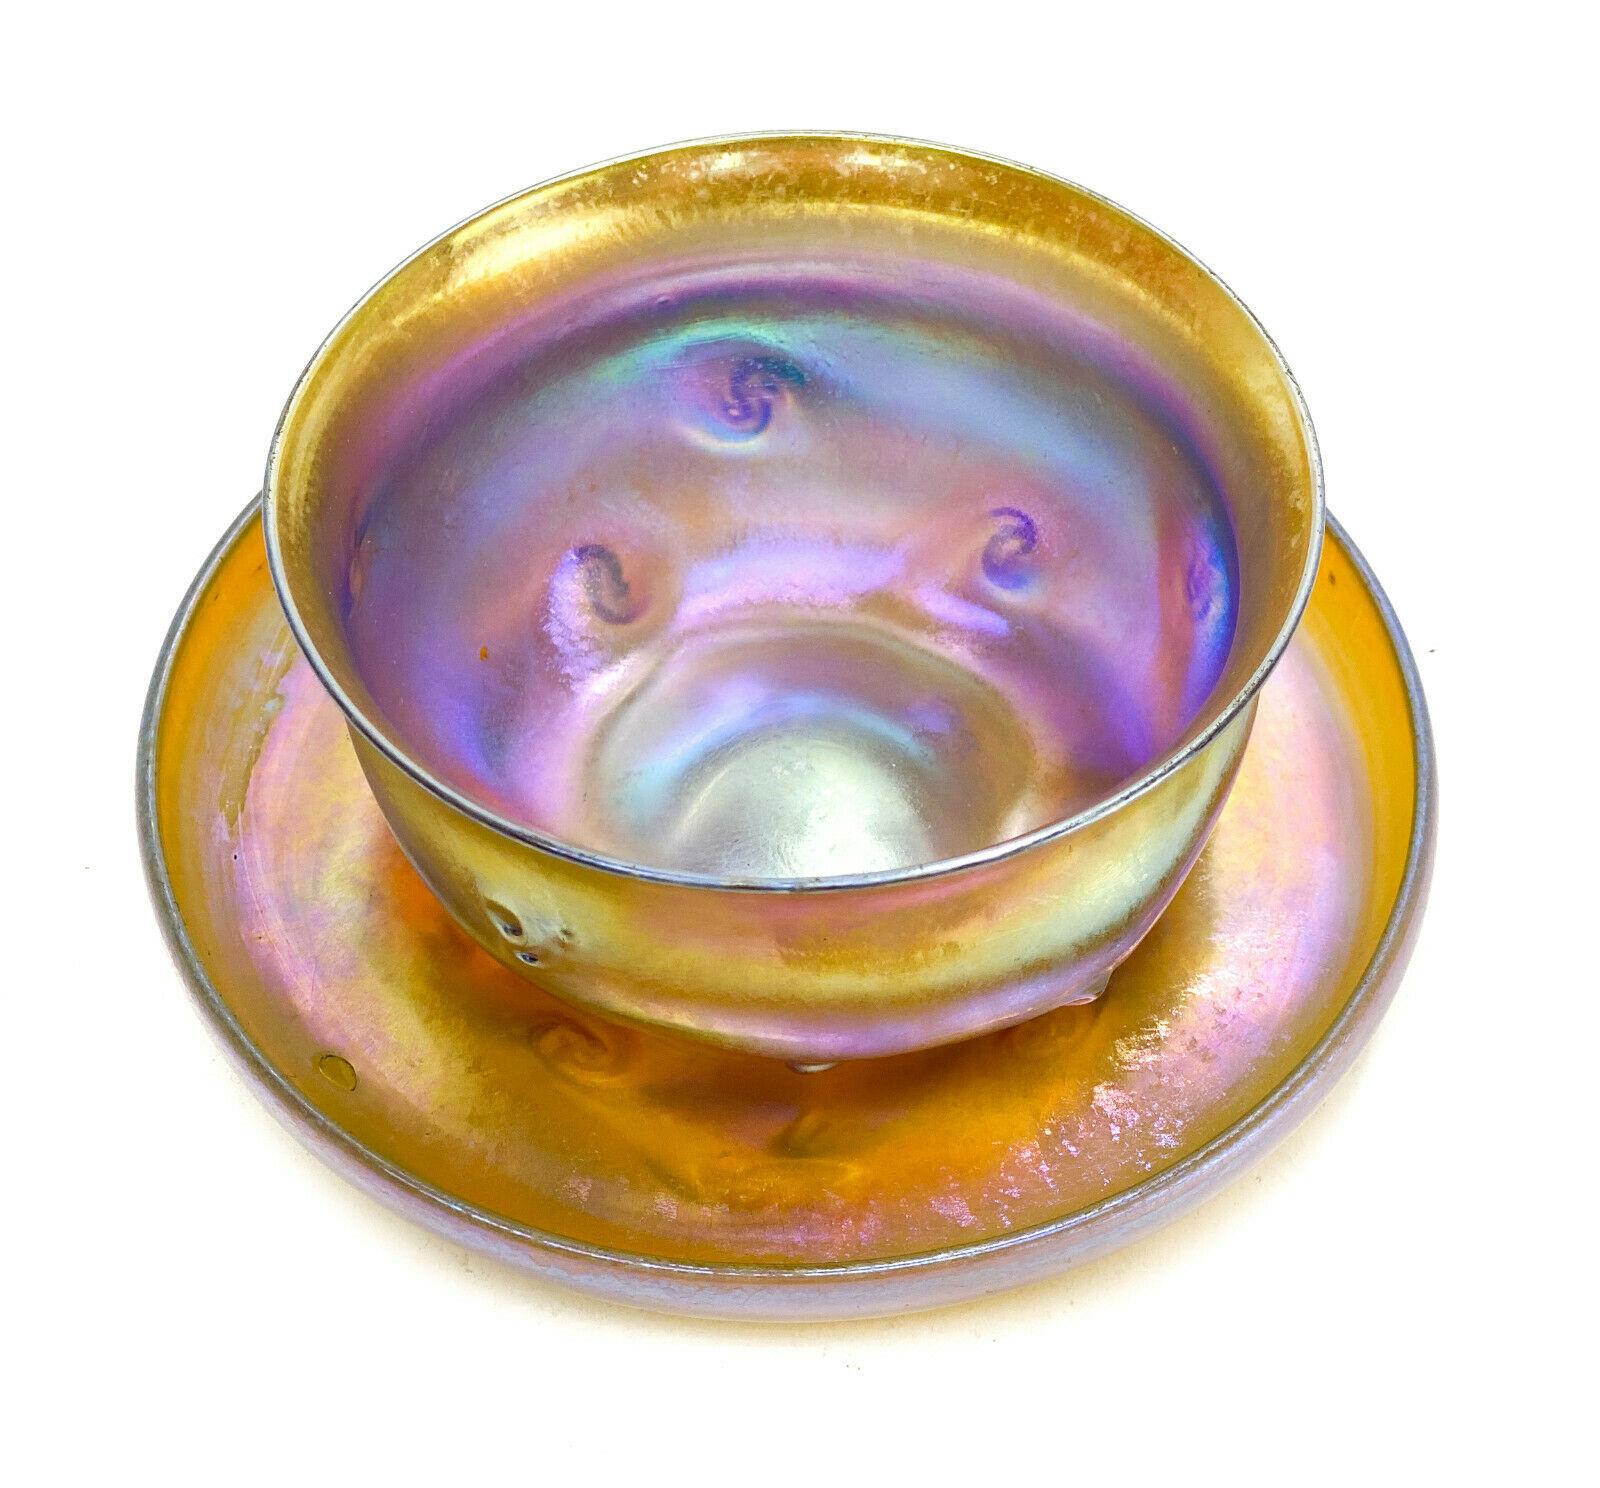 LCT Tiffany favrile gold iridescent bowl and underplate, Prunts, circa 1900.

LCT Tiffany favrile gold iridescent bowl and underplate, circa 1900. Gold iridescence with blue and purple hues. Prunts to the exterior of the bowl and to the underside